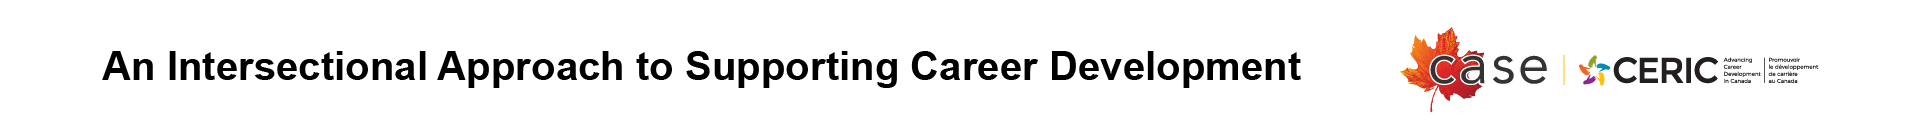 An Intersectional Approach to Supporting Career Development, CASE and CERIC logos